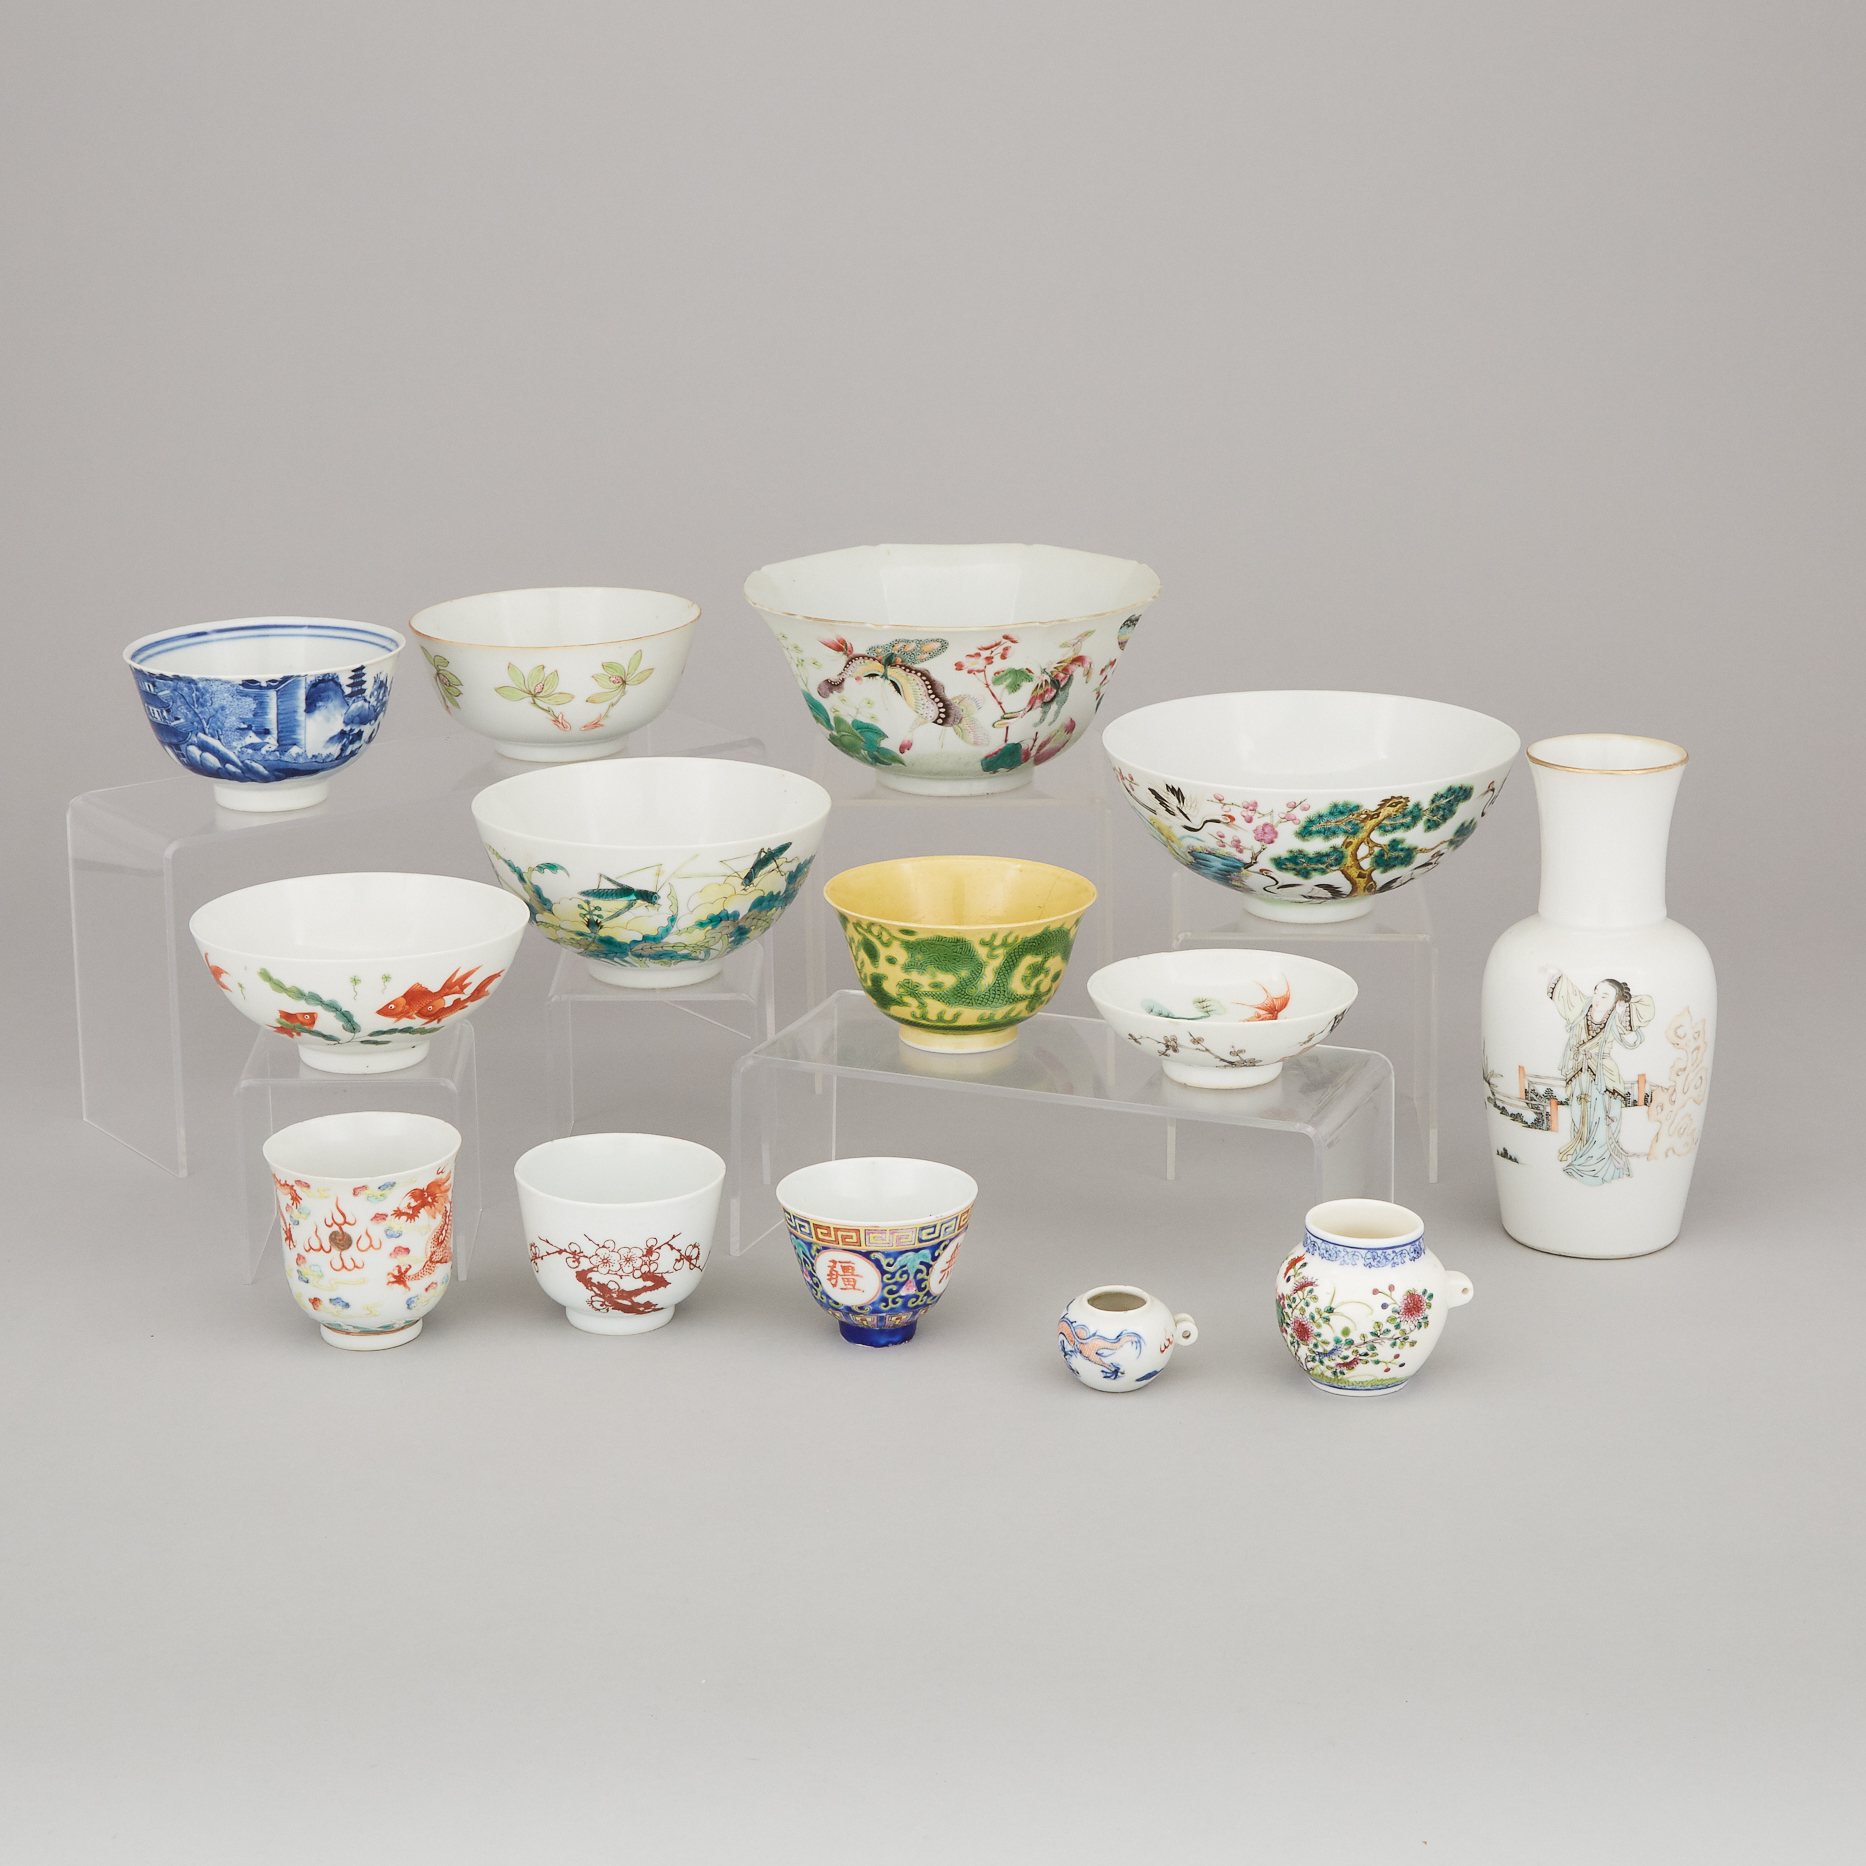 A Group of Fourteen Chinese Porcelain Wares, 19th/20th Century